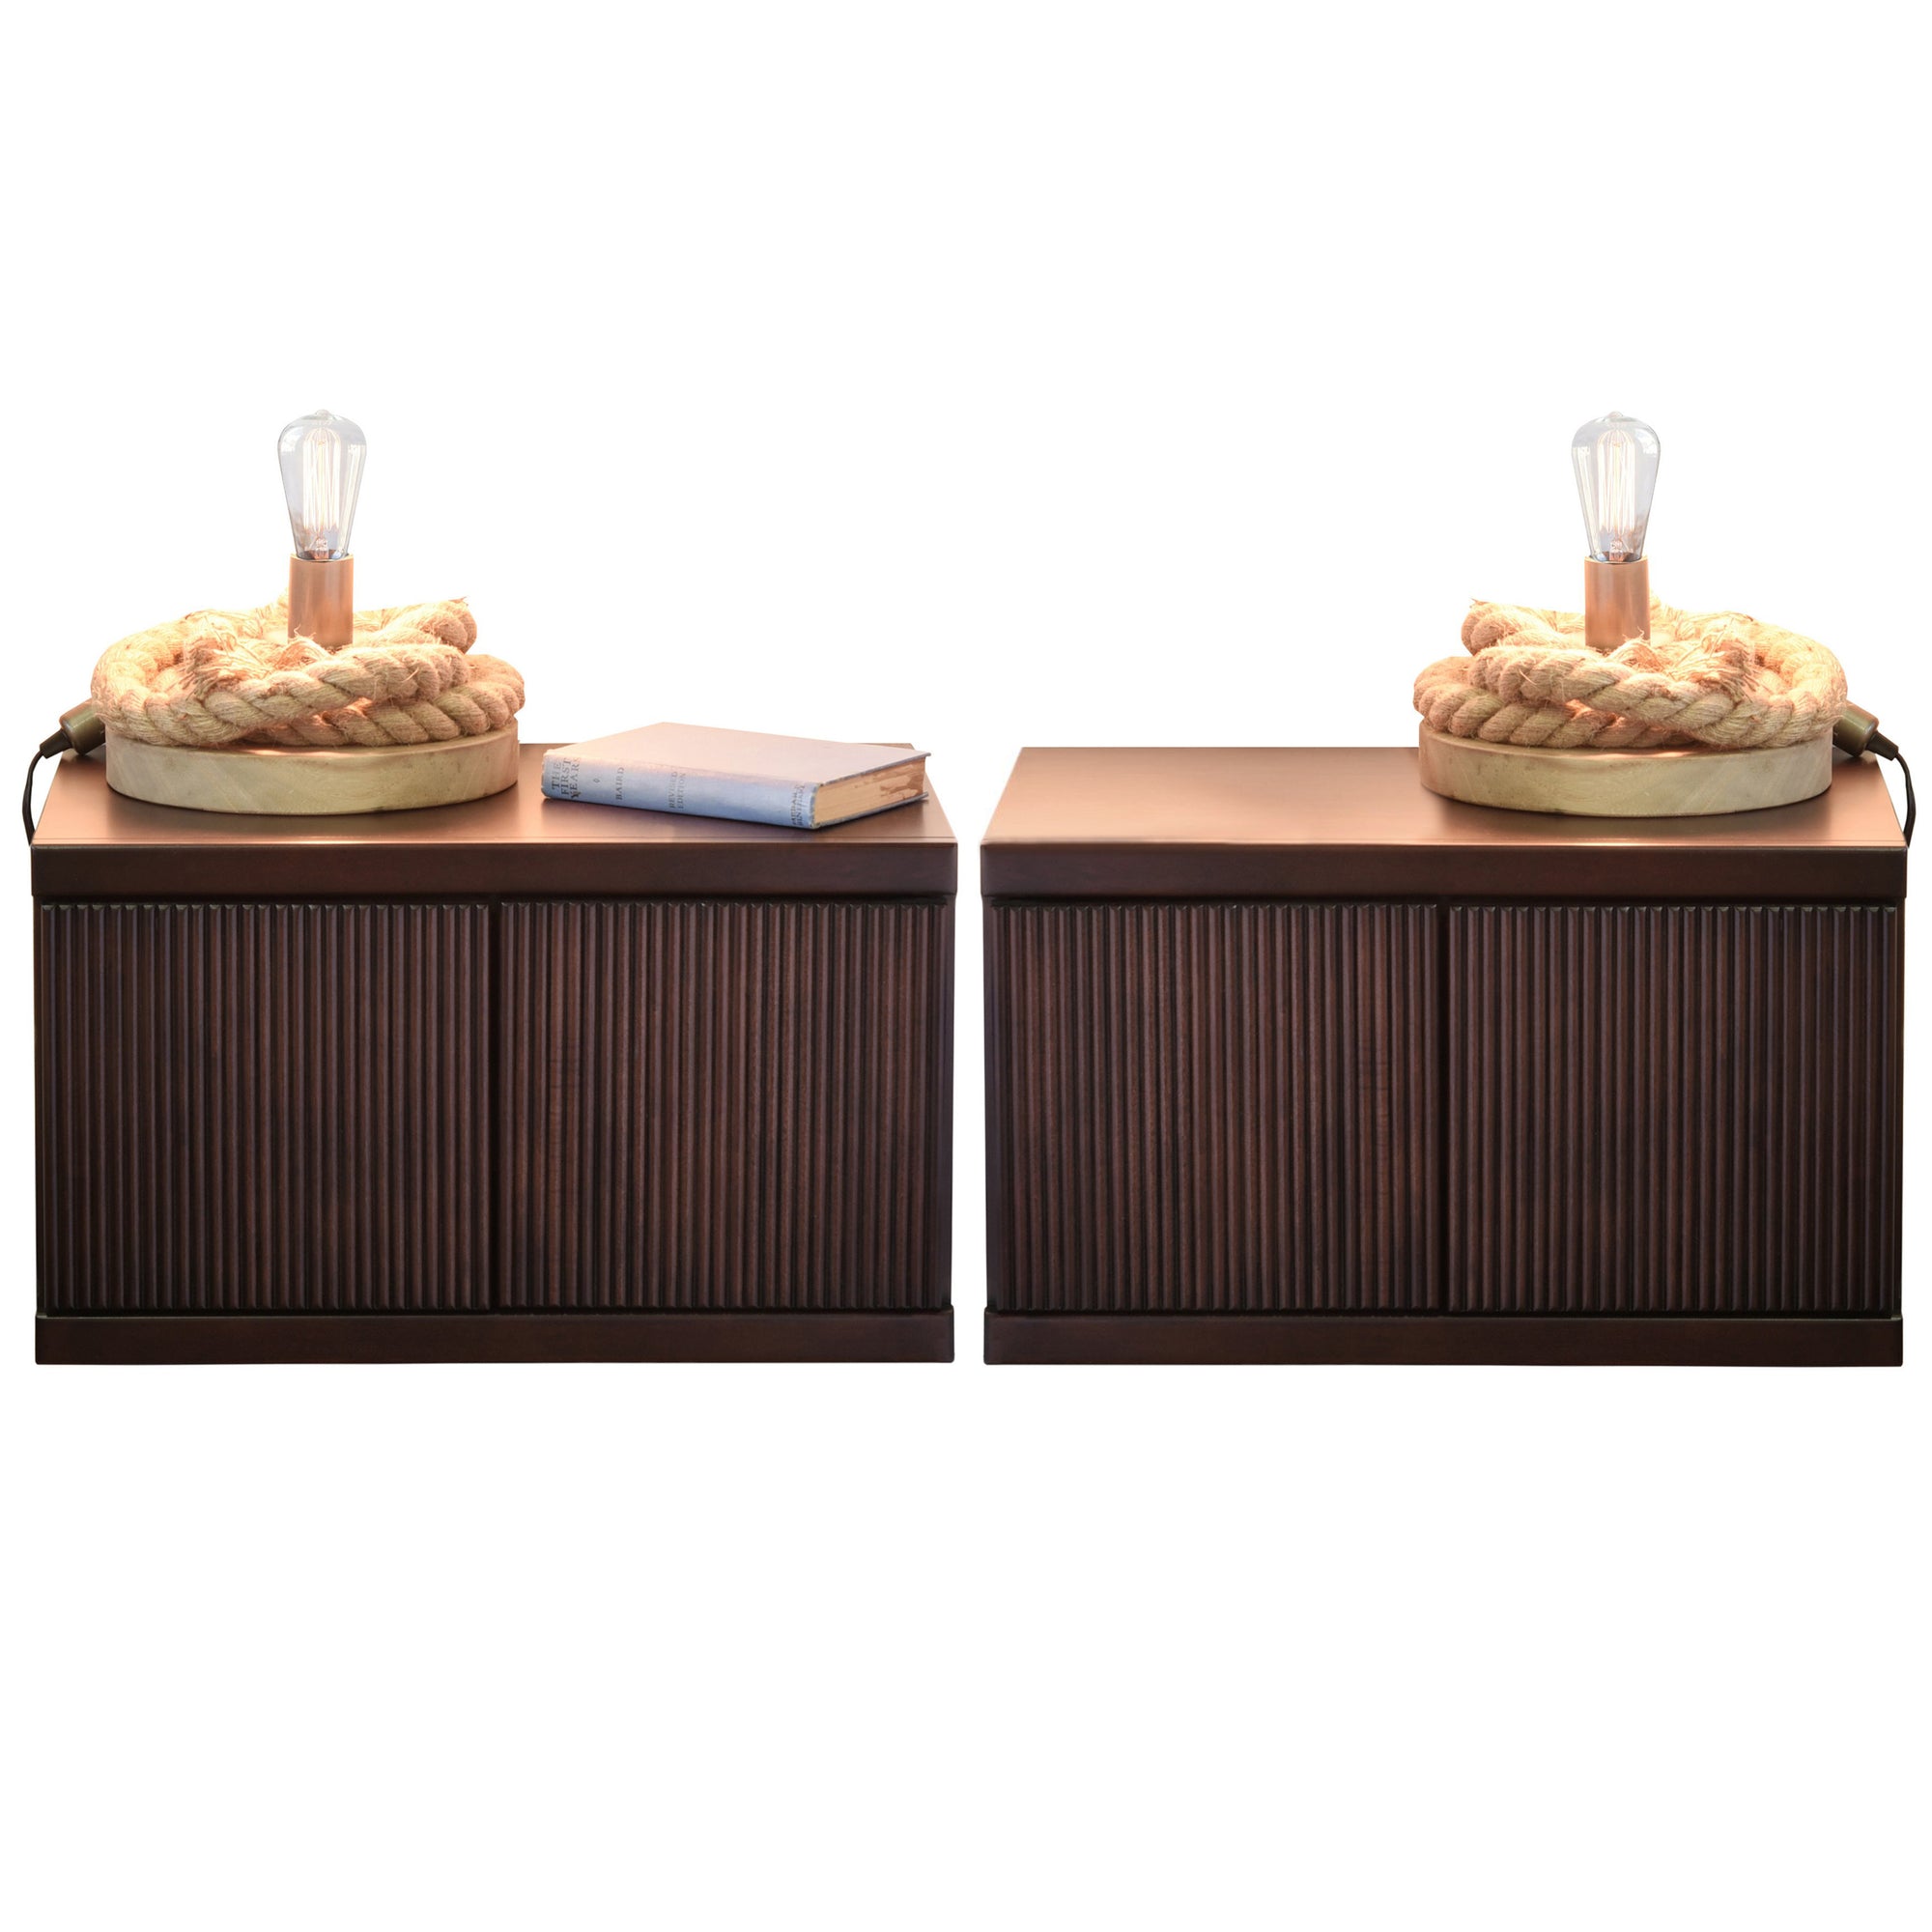 Floating Wall Mounted Hanging Nightstands - Curve - Espresso - Set of 2